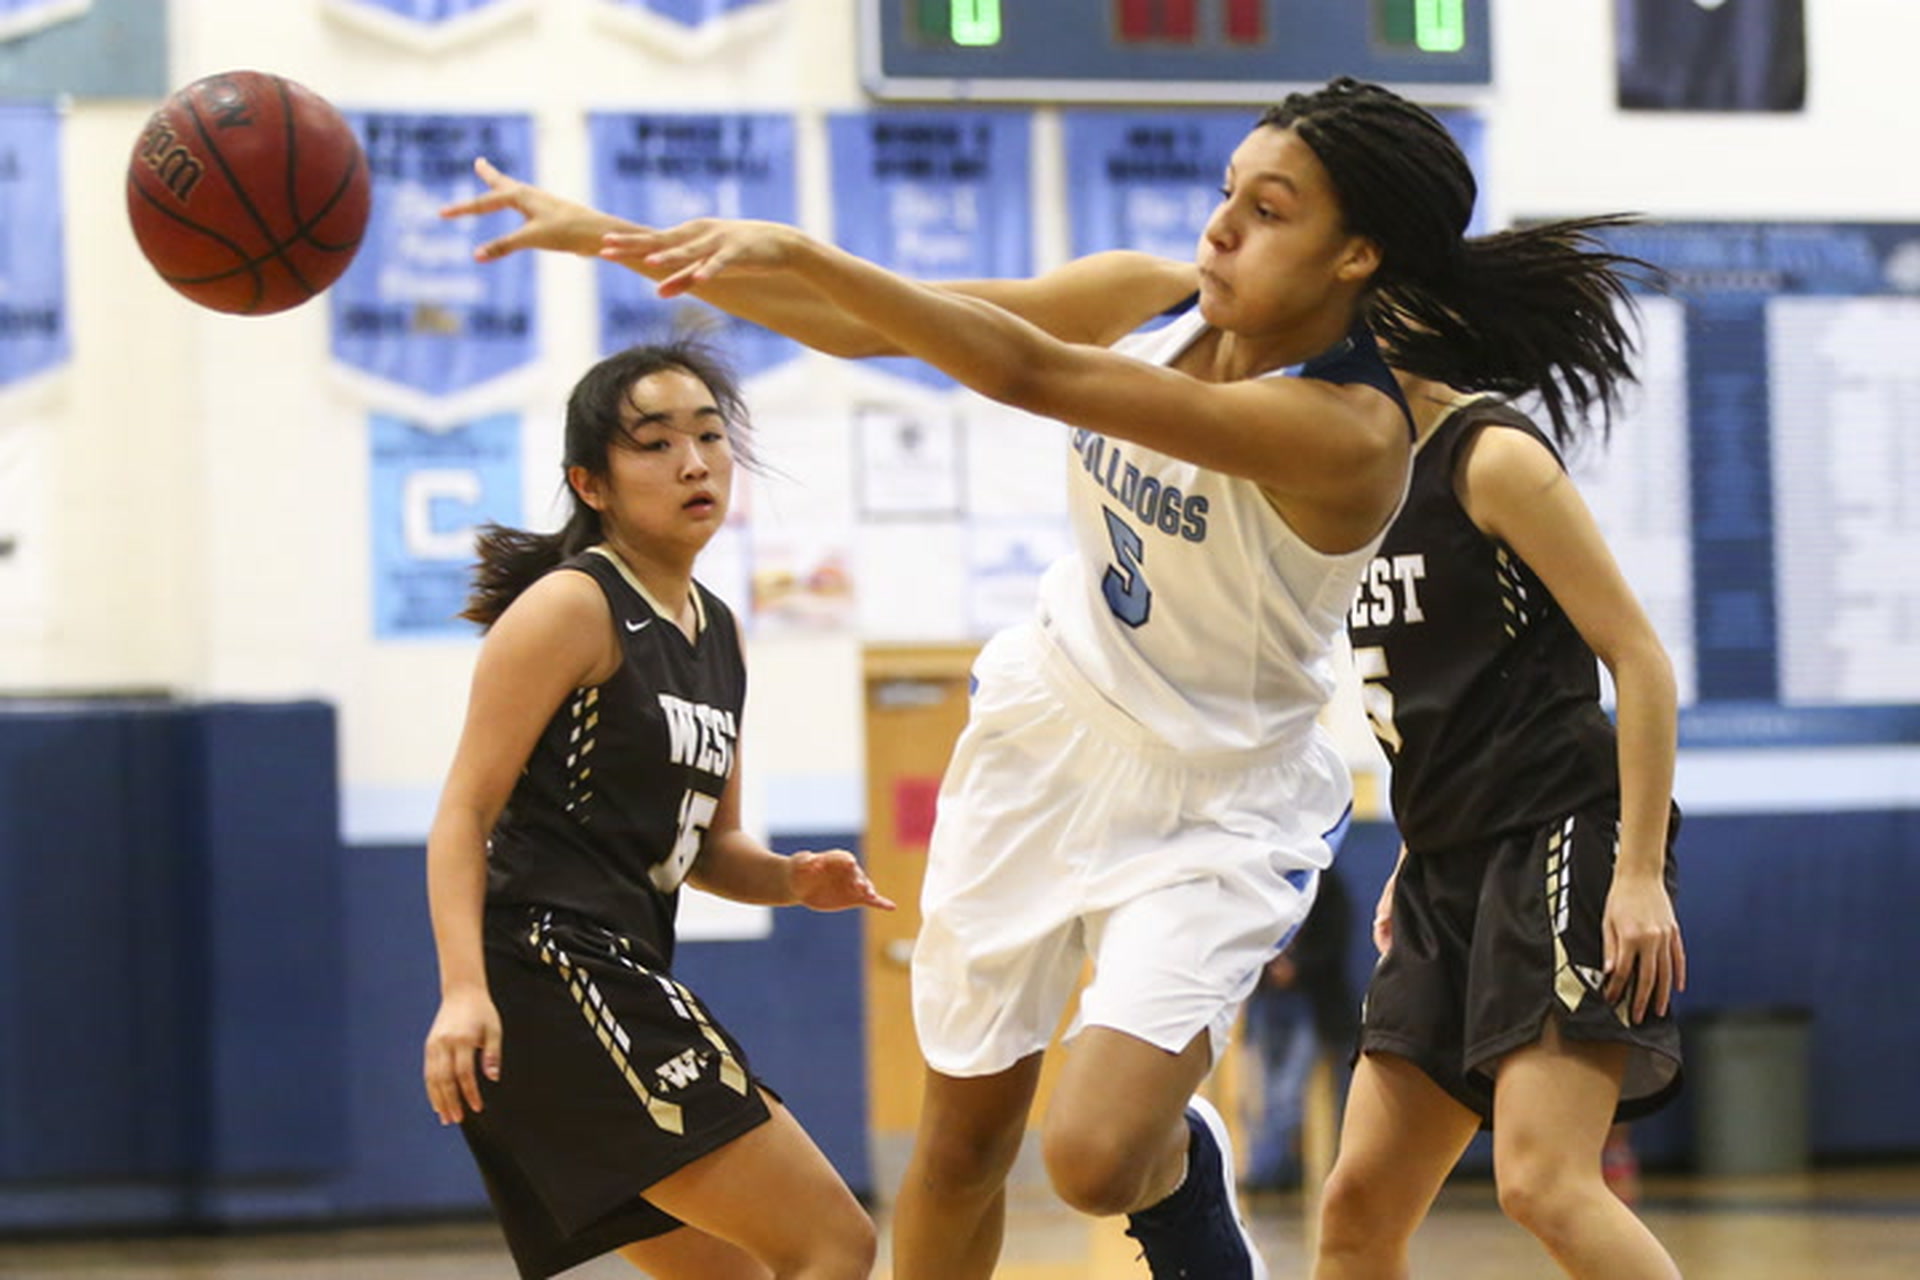 Centennial S Jade Thomas Will Join Sisters At Division I Level